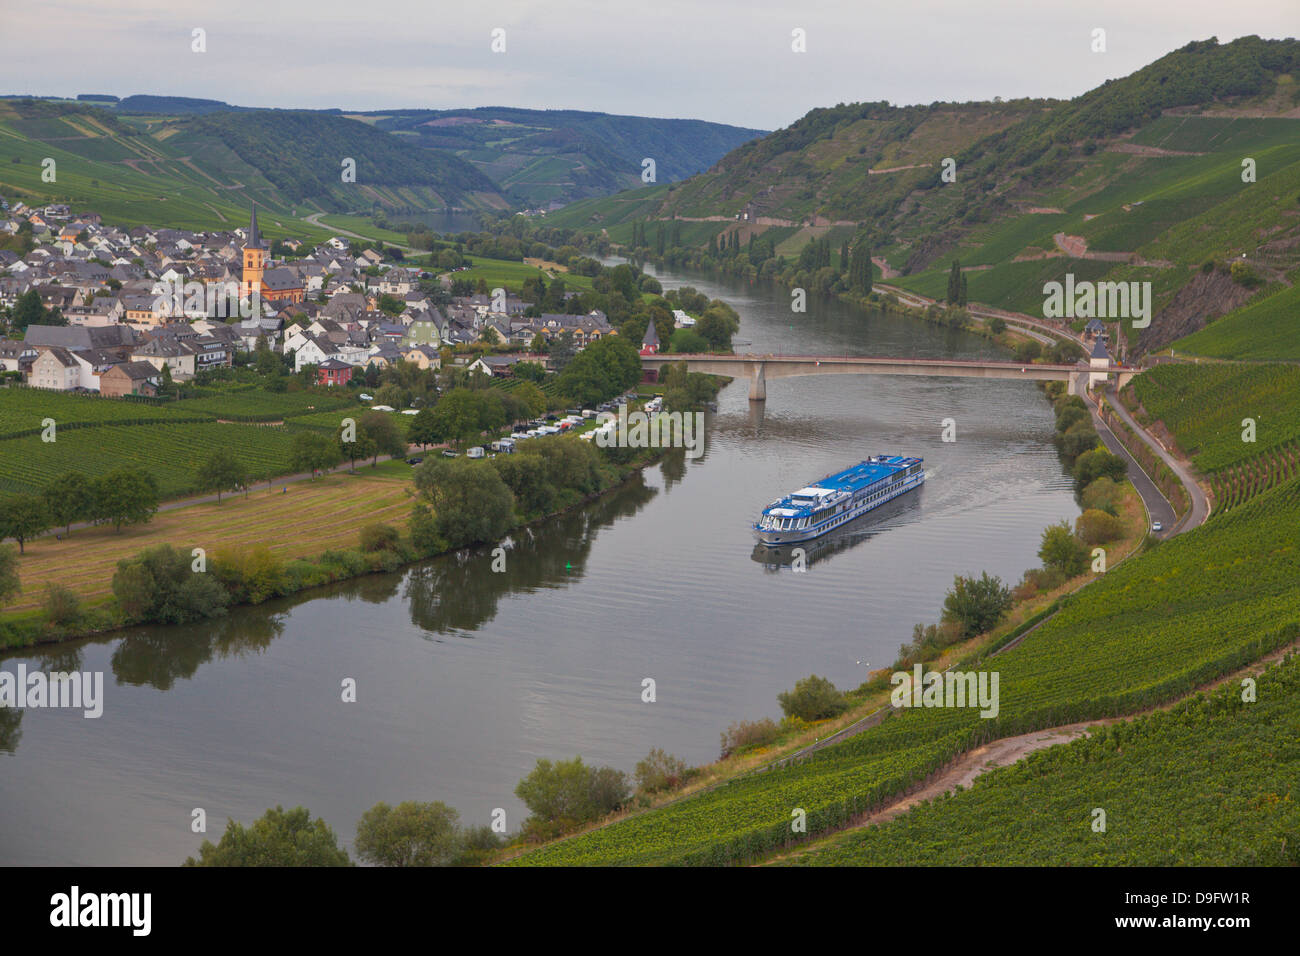 River cruise ship on the River Moselle, Germany Stock Photo